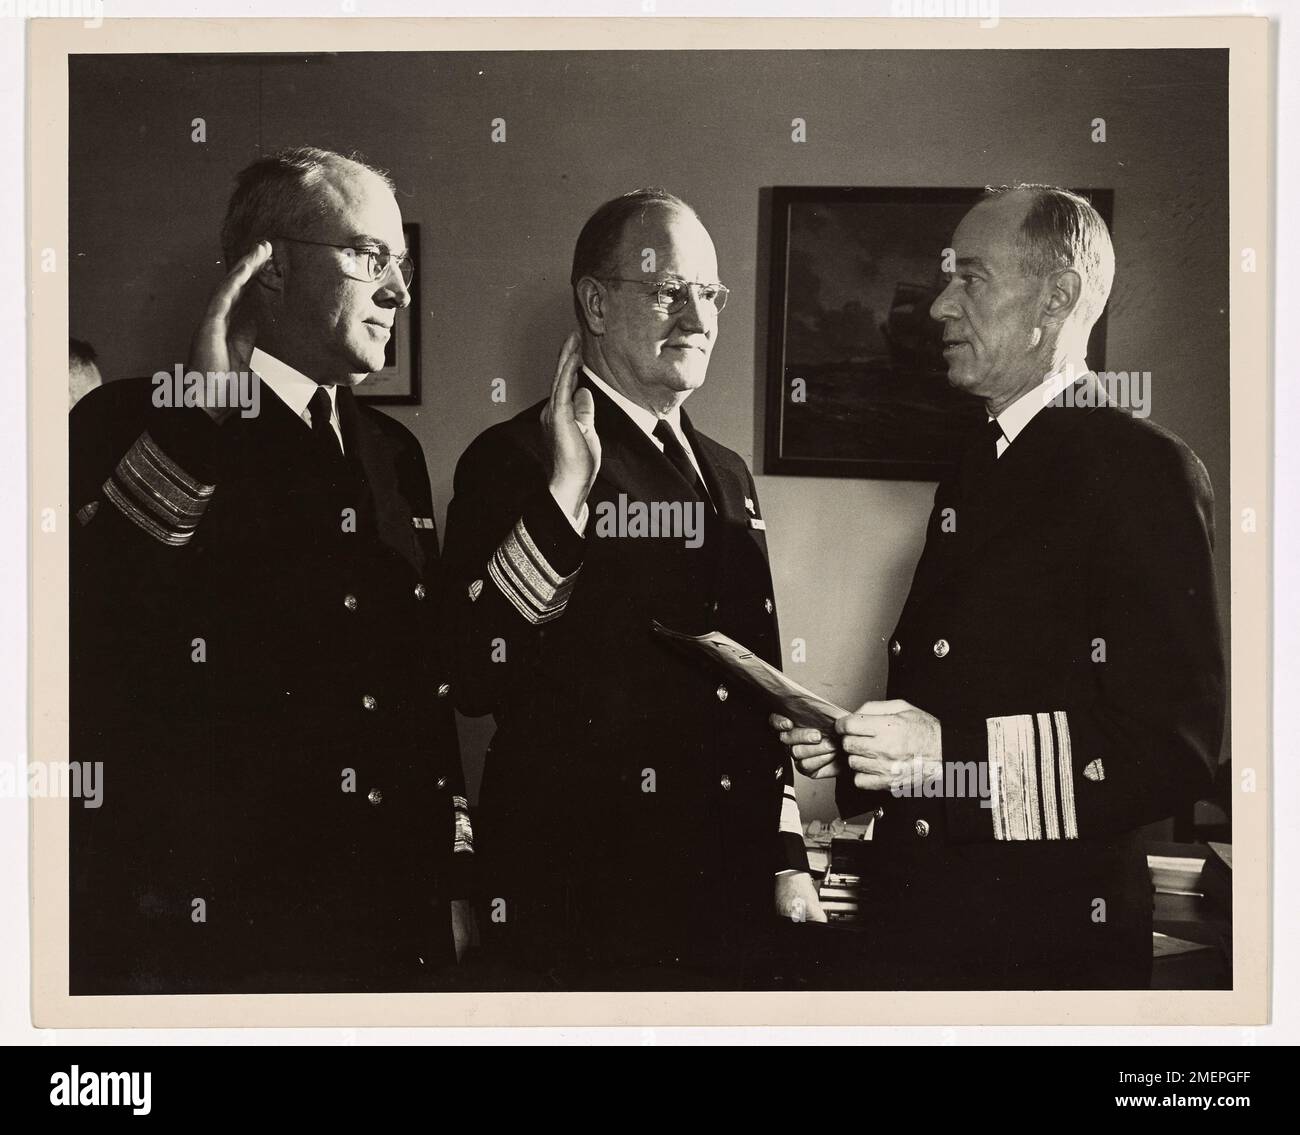 Coast Guard Officers Become Rear Admirals. Promoted to the rank of rear admiral in the U.S. Coast Guard, Commodore Joseph F. Farley, left, and Captain Philip B. Eaton, center, are sworn into their new offices by Vice Admiral Russell R. Waesche, Commandant of the Coast Guard. Both officers are on duty a Coast Guard Headquarters, Washington, D.C. Rear Admiral Farley, of Alexandria, Va., is Assistant Chief of Operations, and Rear Admiral Eaton, of Rock Creek Park, Washington, is Assistant Engineer-In-Chief. Stock Photo